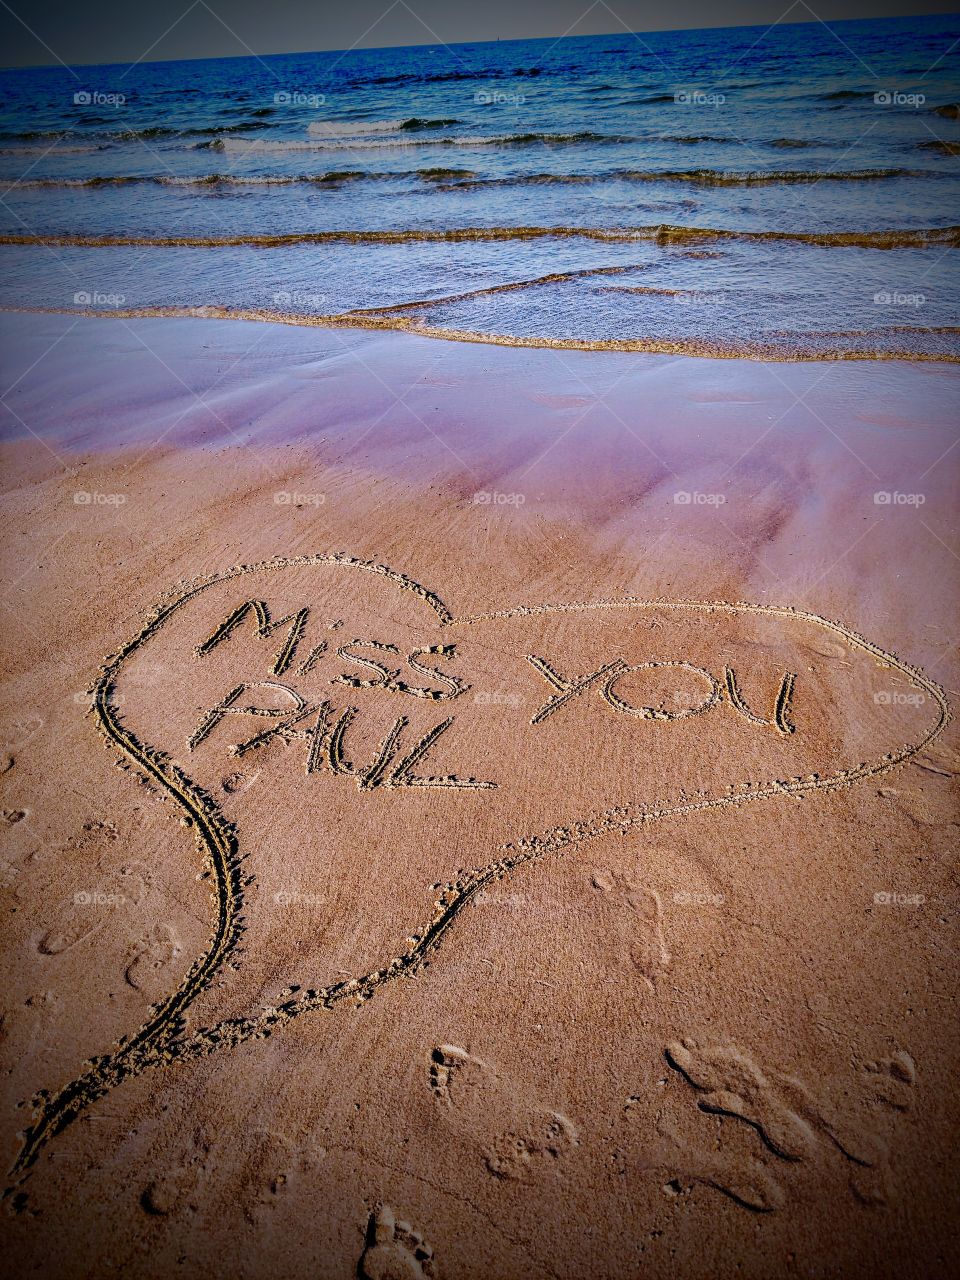 missing my child's and wrote in the sand. army strong!